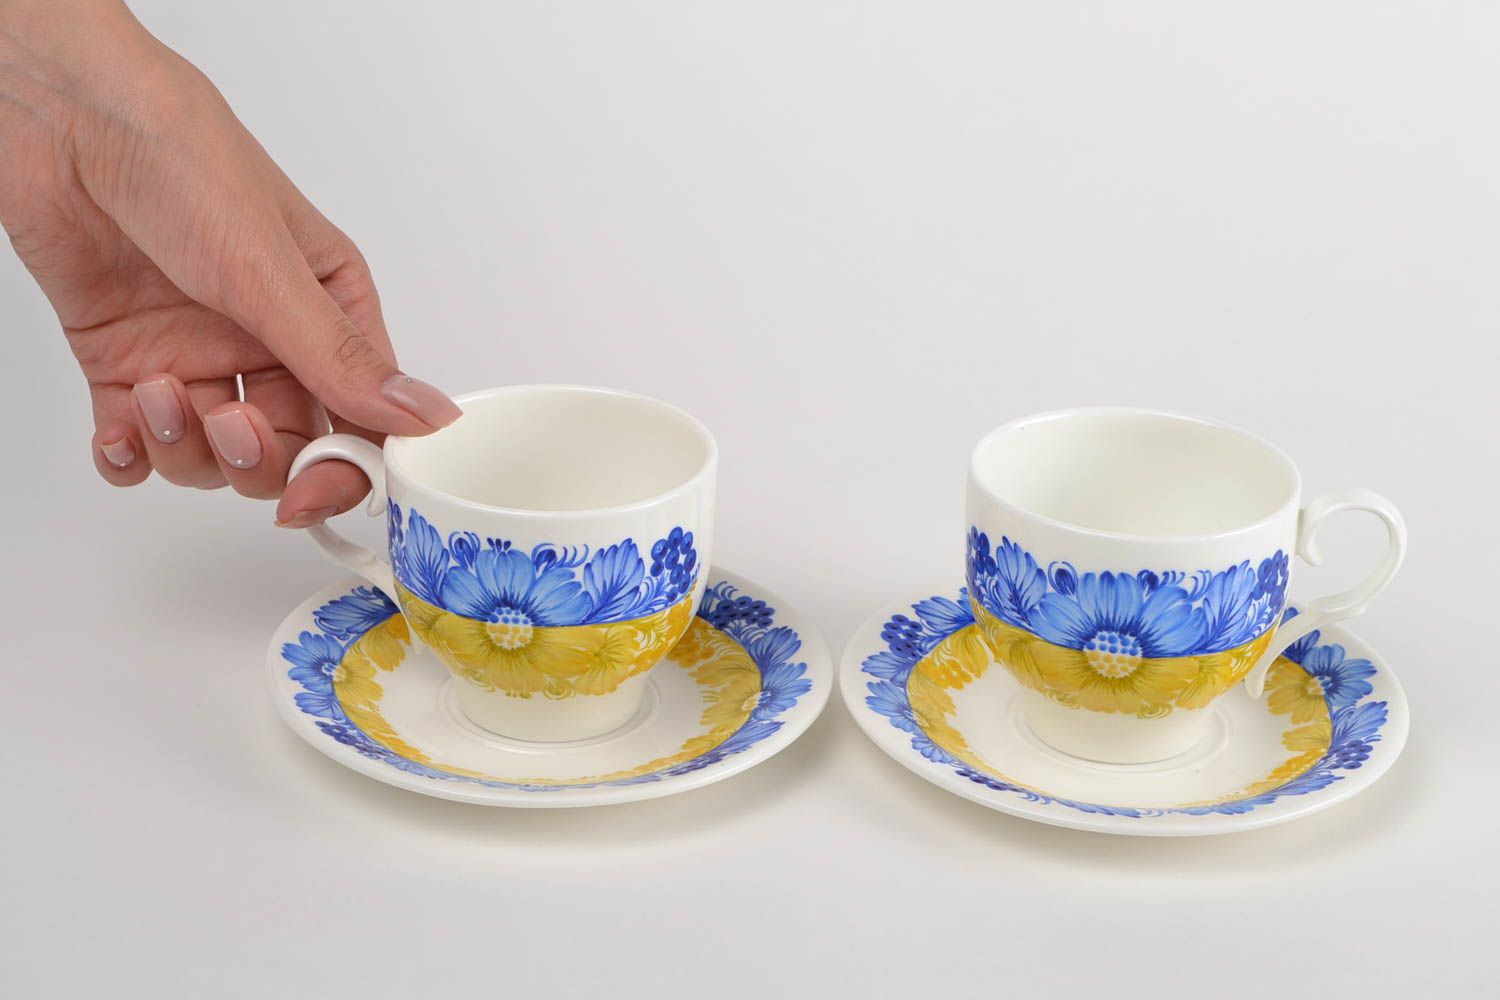 Set of 2 two teacups in white, blue, and yellow colors with saucers photo 2